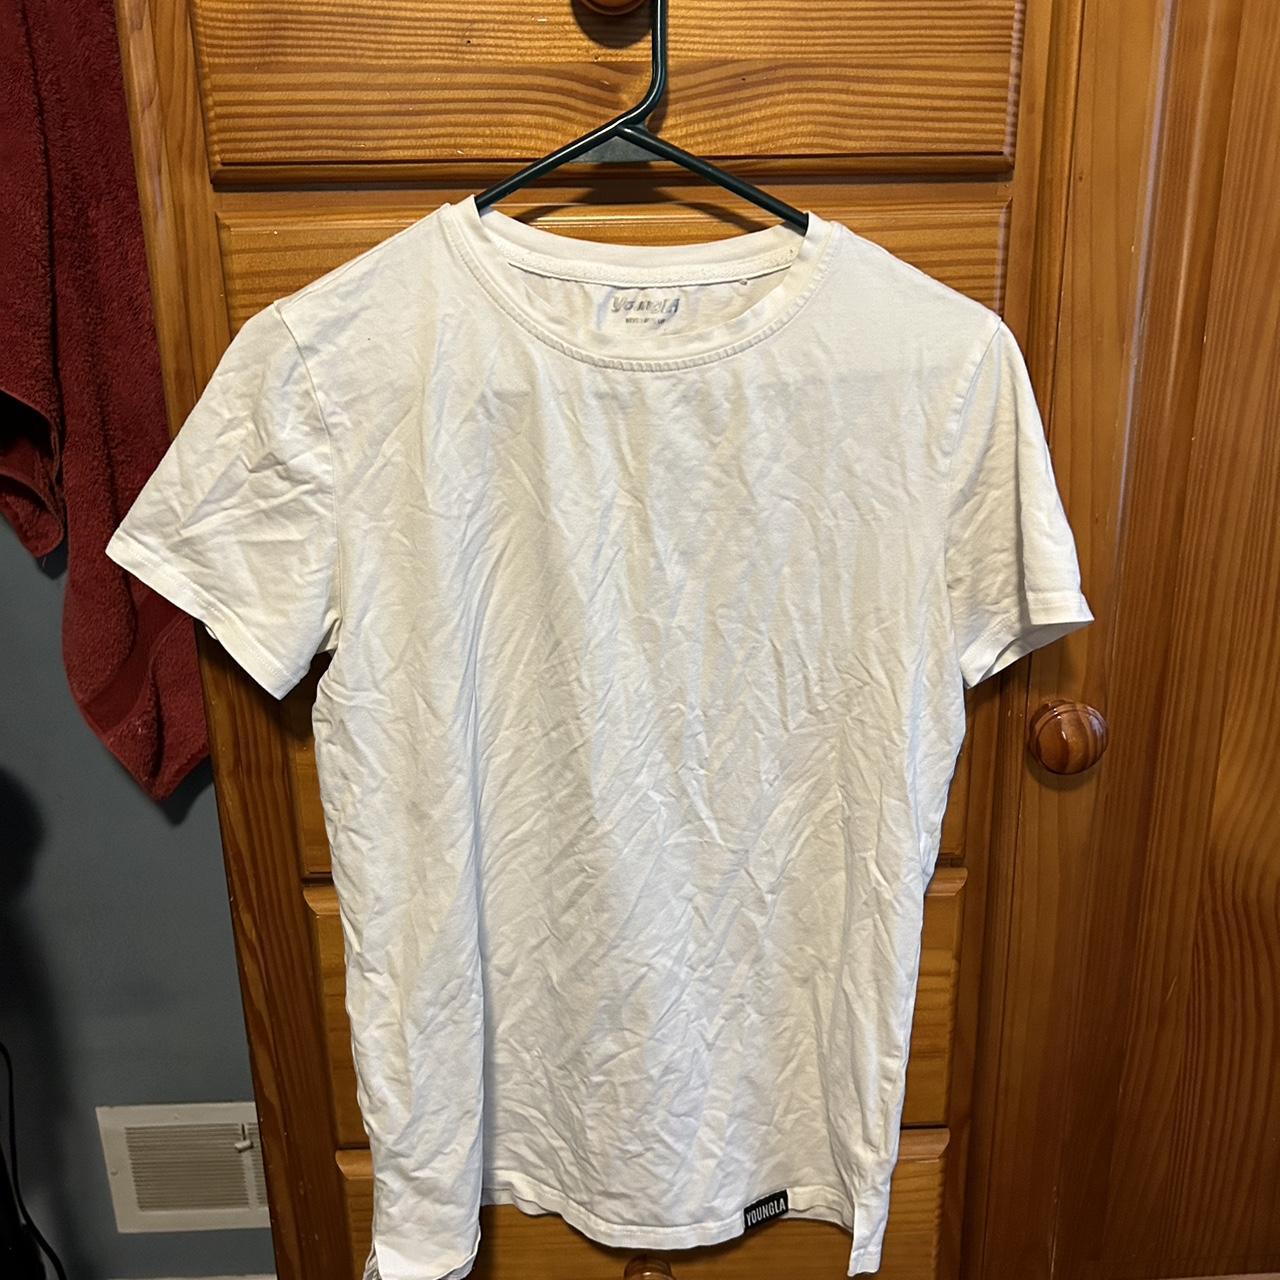 Youngla size small white perfect tee - Depop